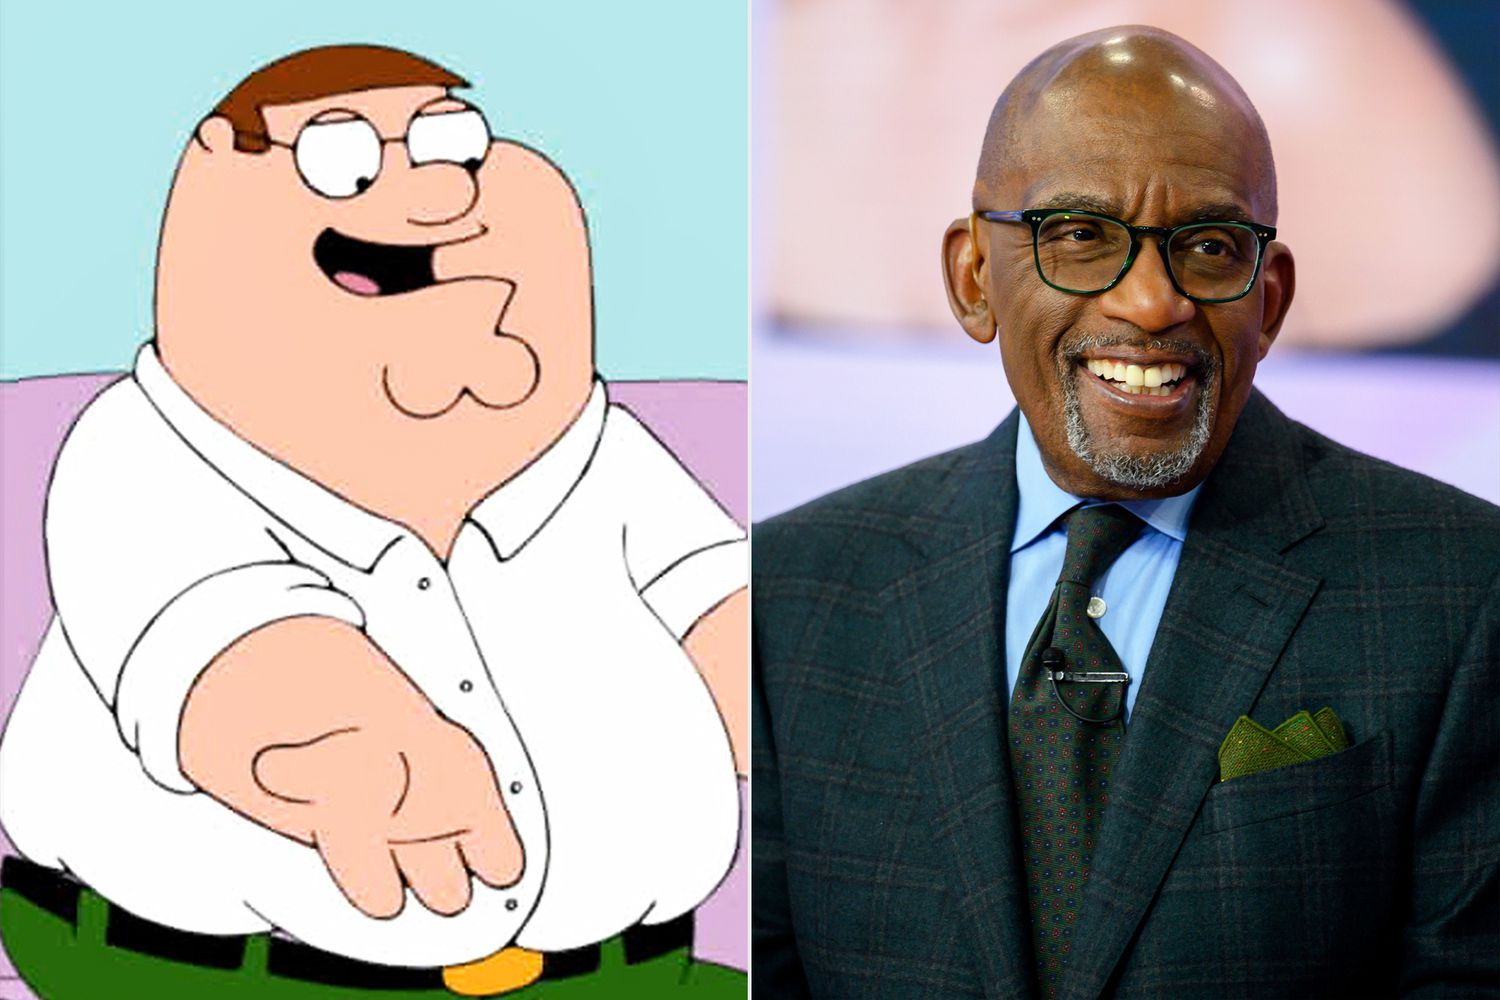 Peter Griffin Family Guy and Al Roker